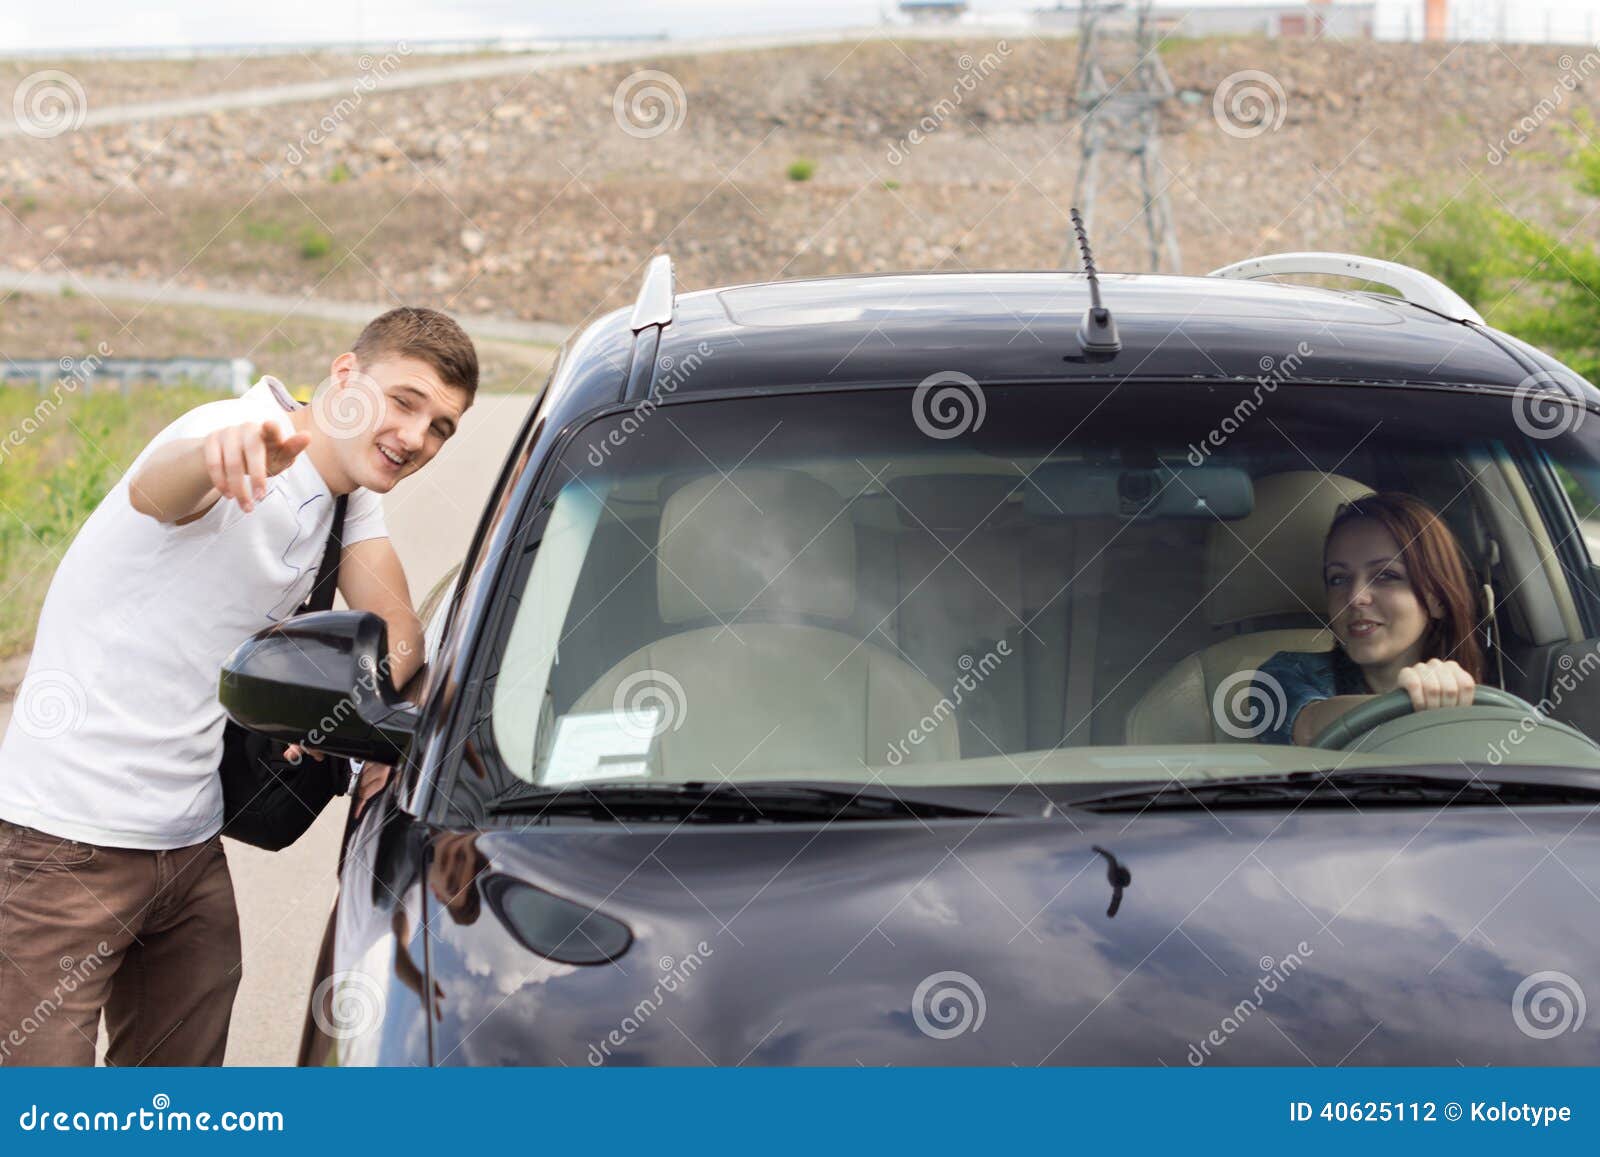 young man giving directions to a woman driver